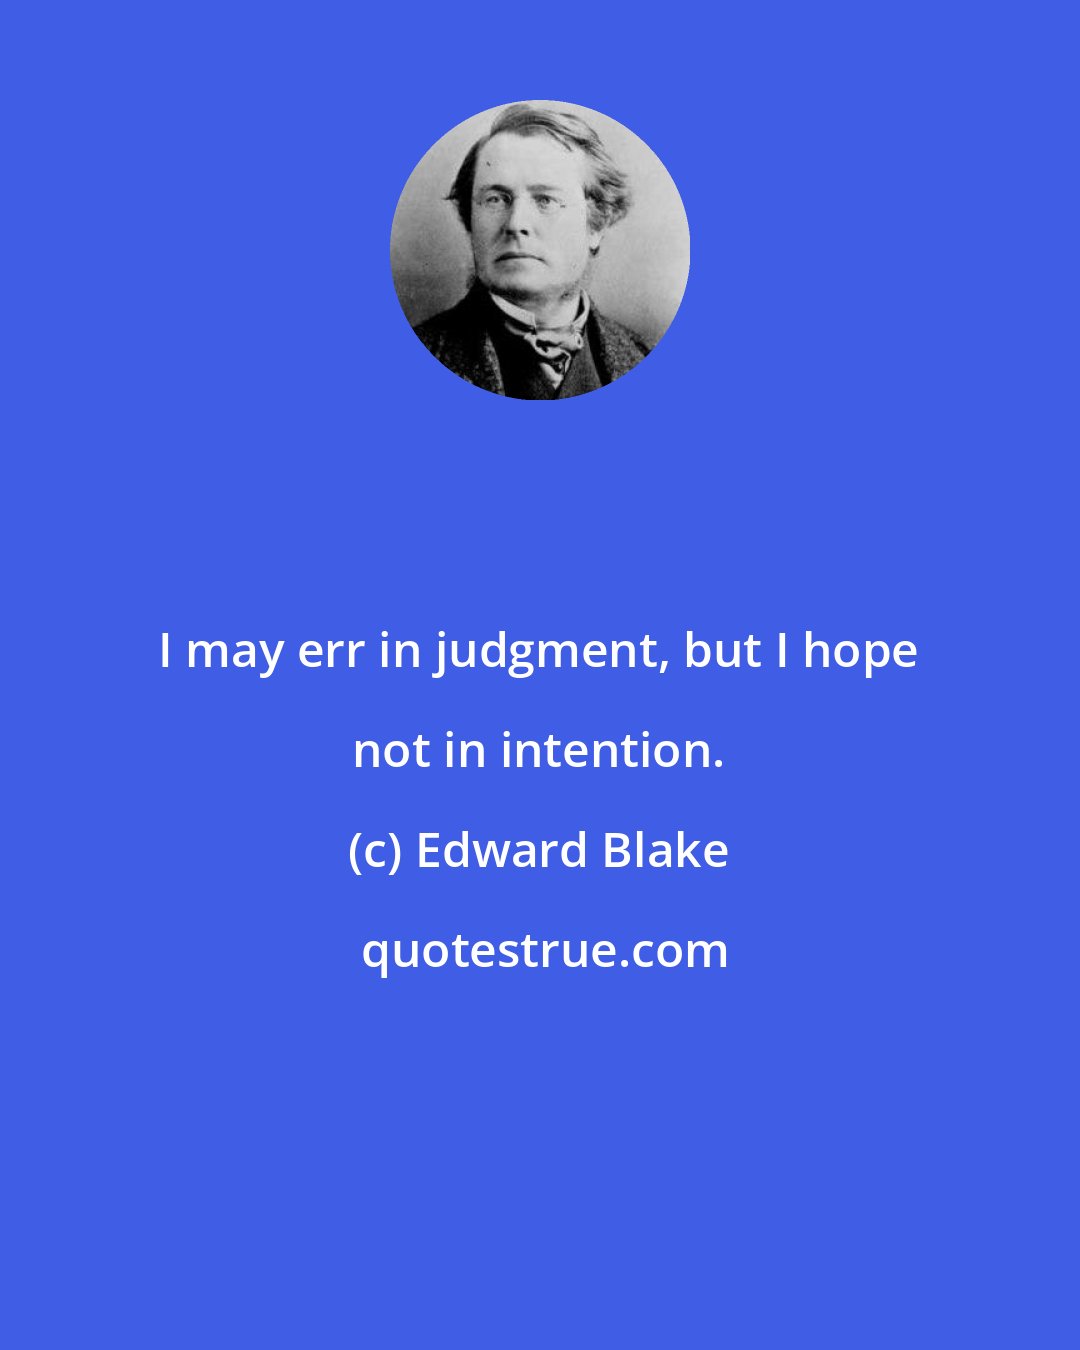 Edward Blake: I may err in judgment, but I hope not in intention.